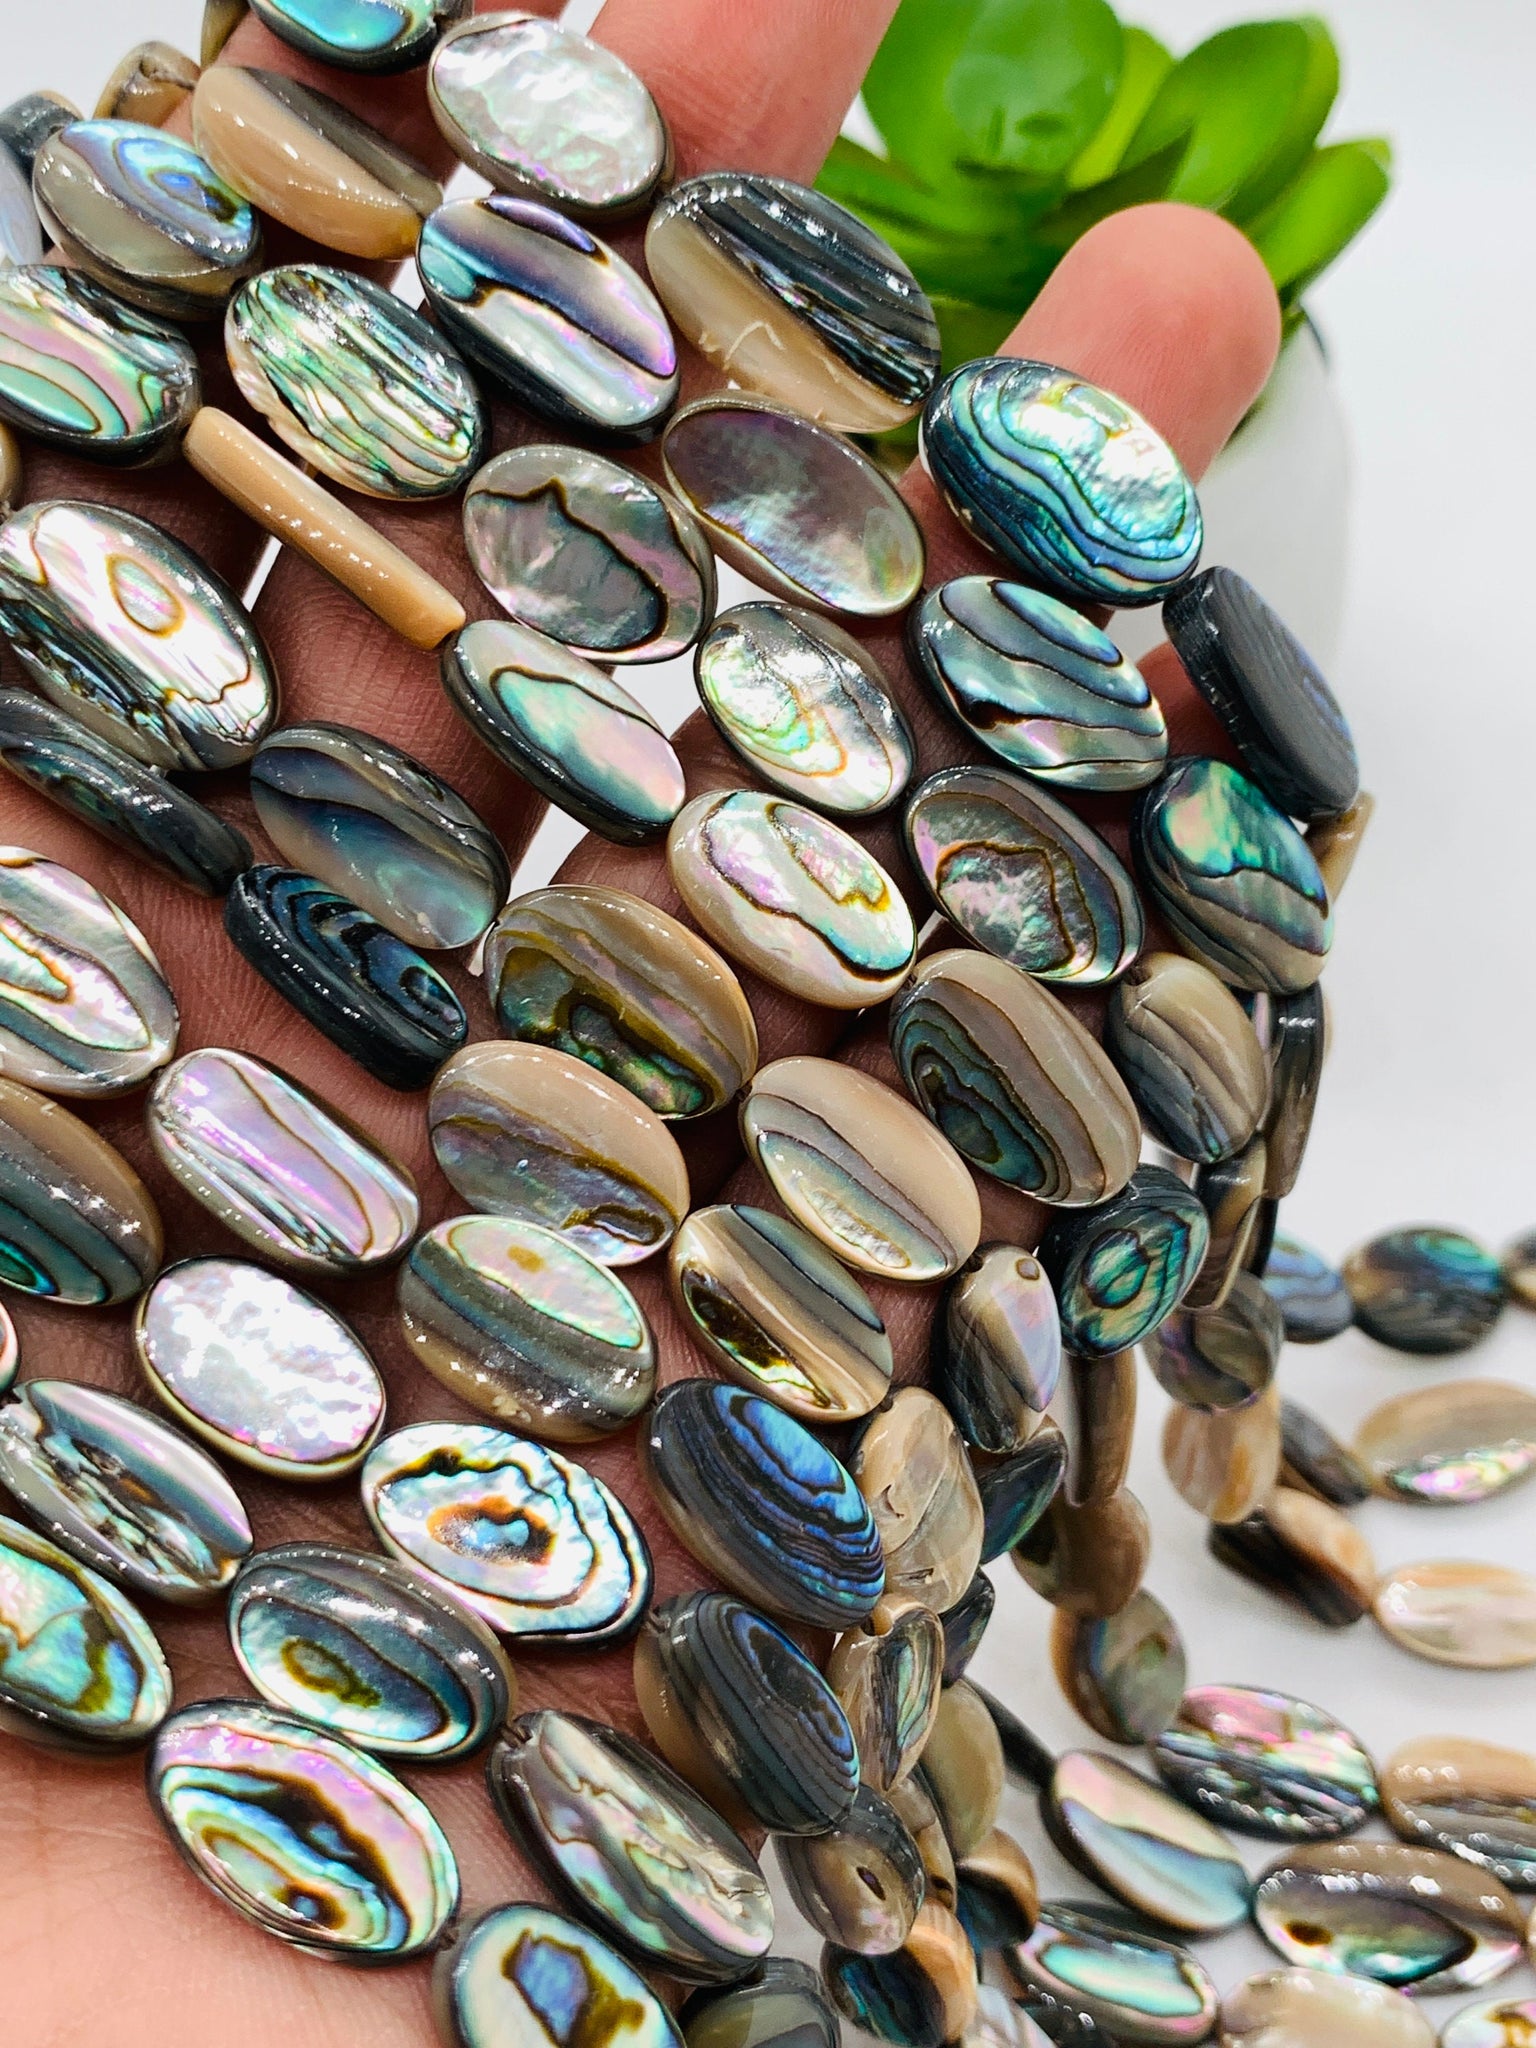 Abalone Shell Oval Beads • 8x12 mm Size • 40 cm length • AAA